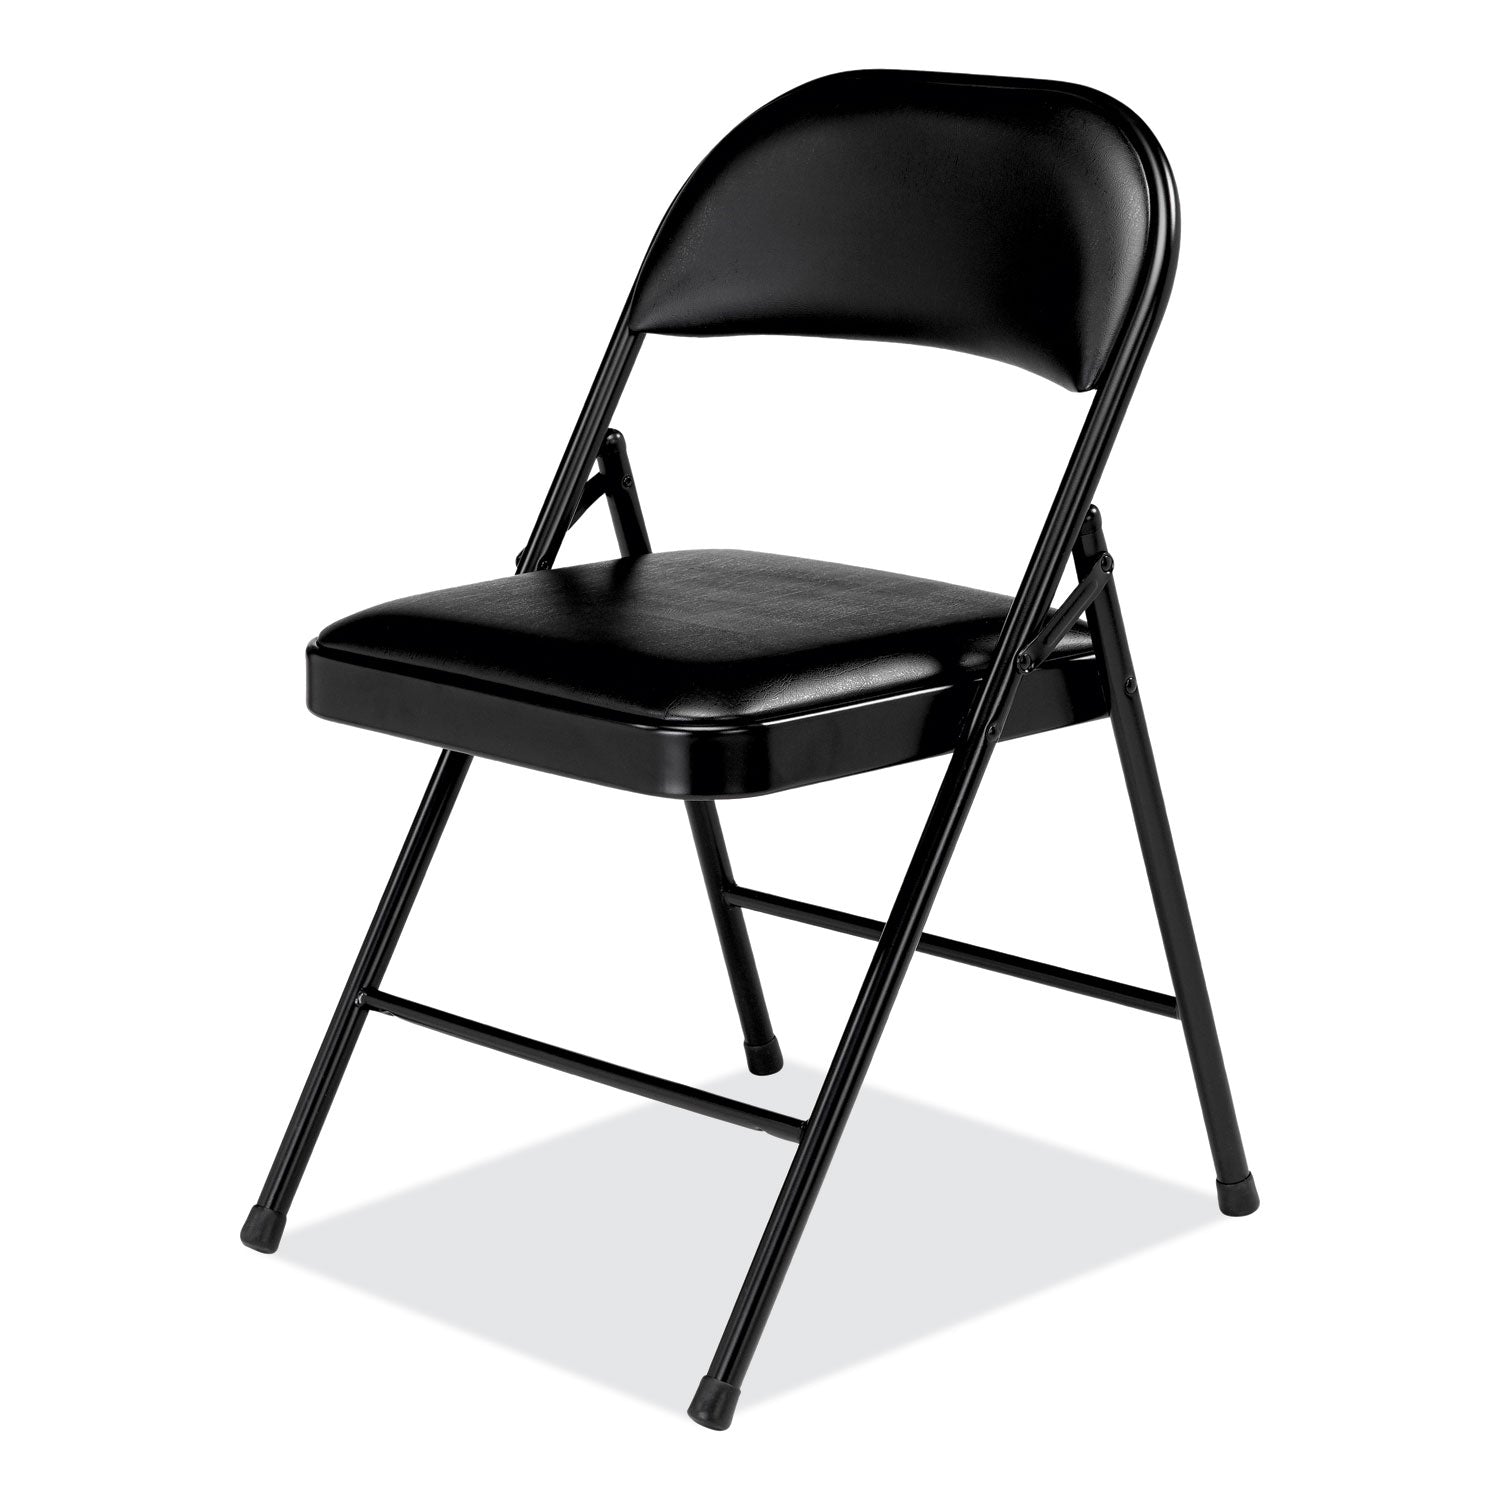 950-series-vinyl-padded-steel-folding-chair-supports-up-to-250-lb-1775-seat-height-black-4-cartonships-in-1-3-bus-days_nps950 - 3